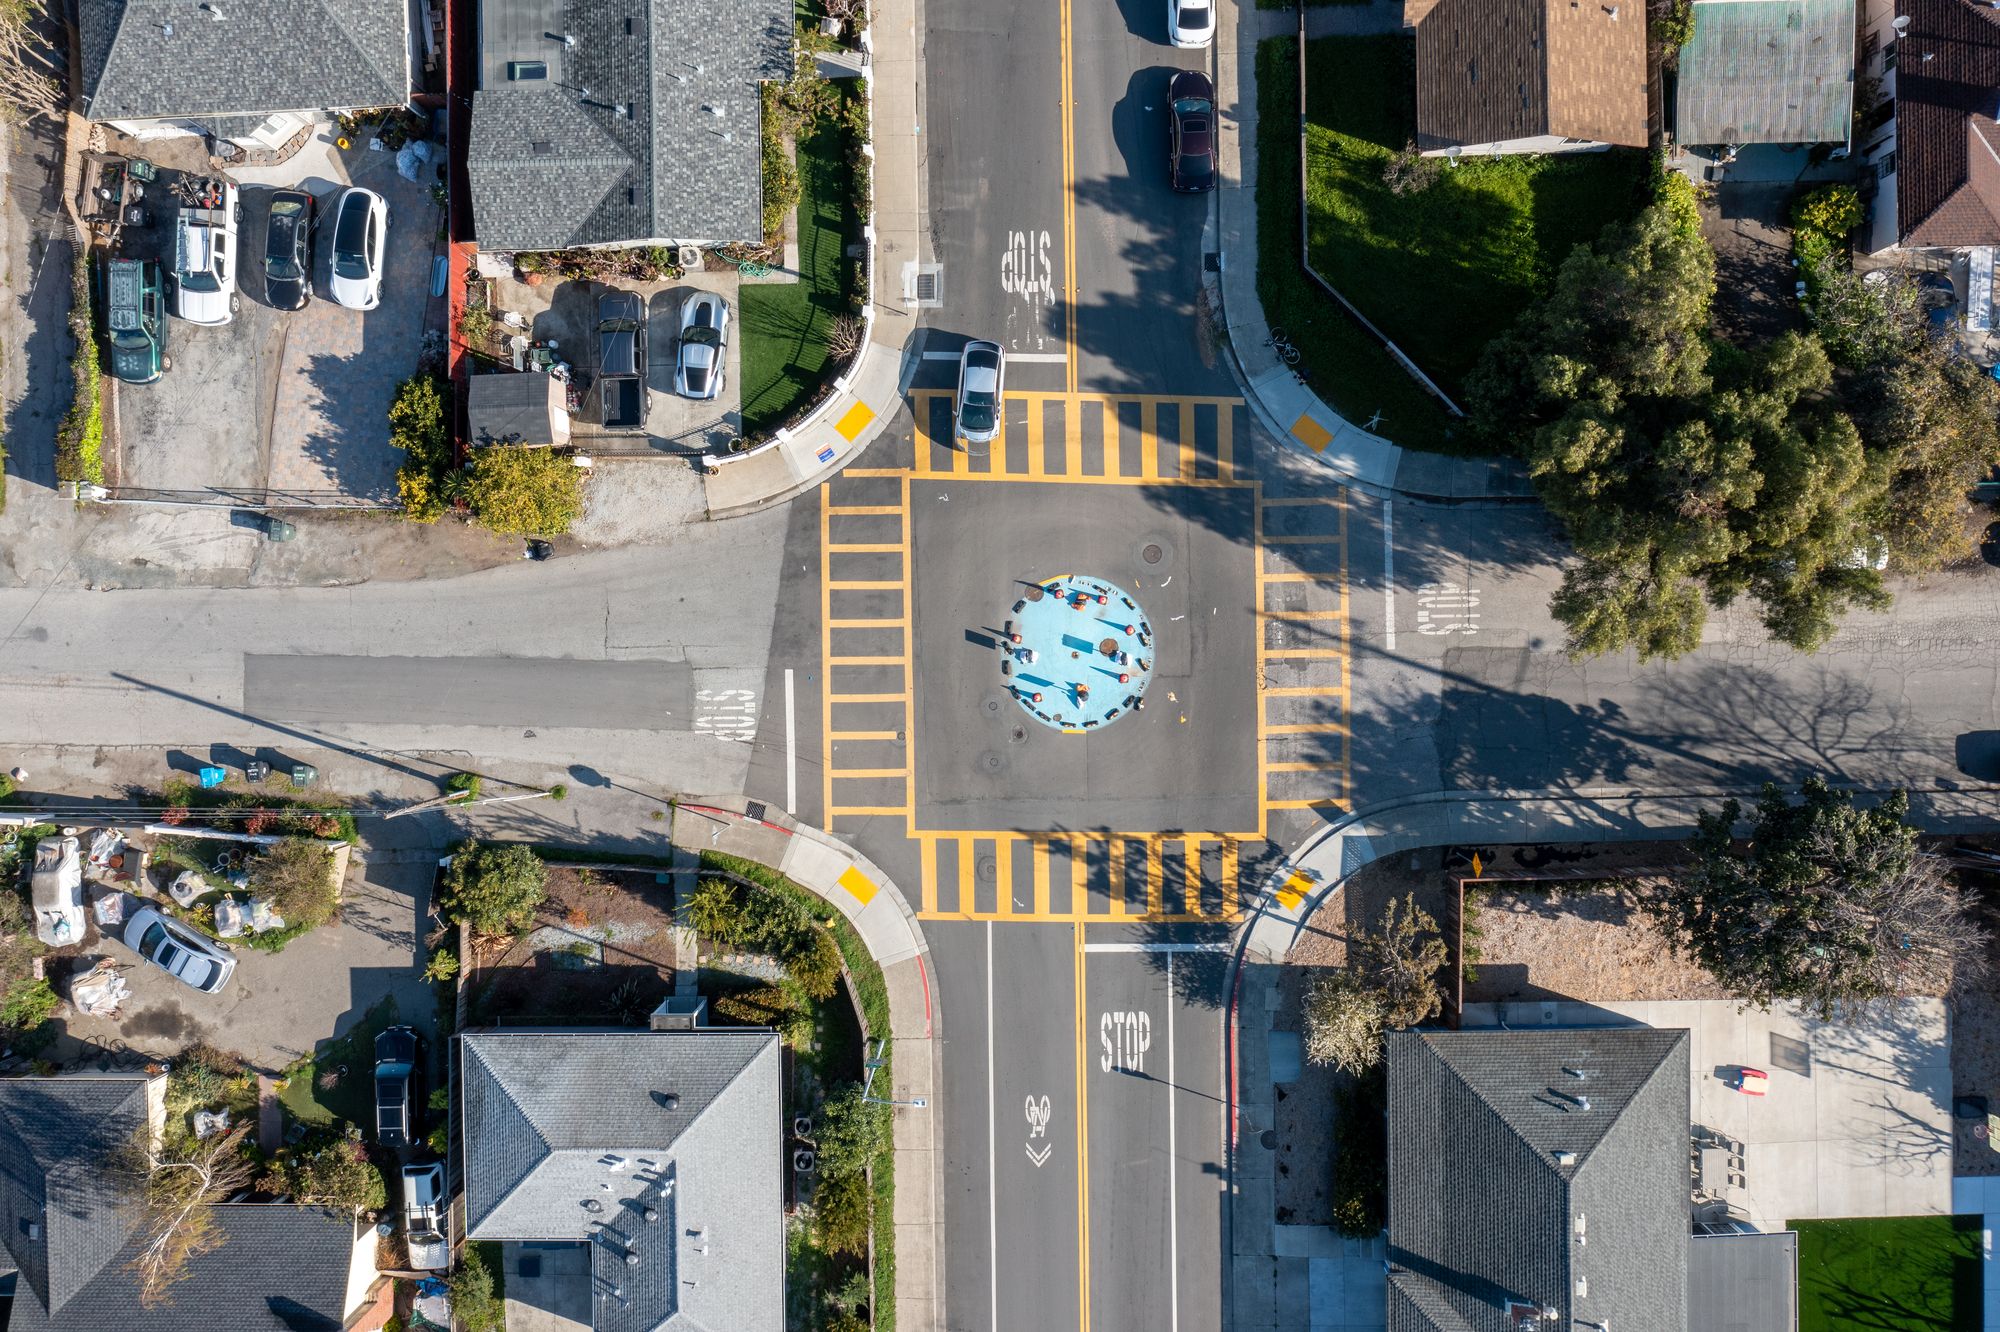 Converting Two East Palo Alto Temporary Traffic Circles to Mini Roundabouts